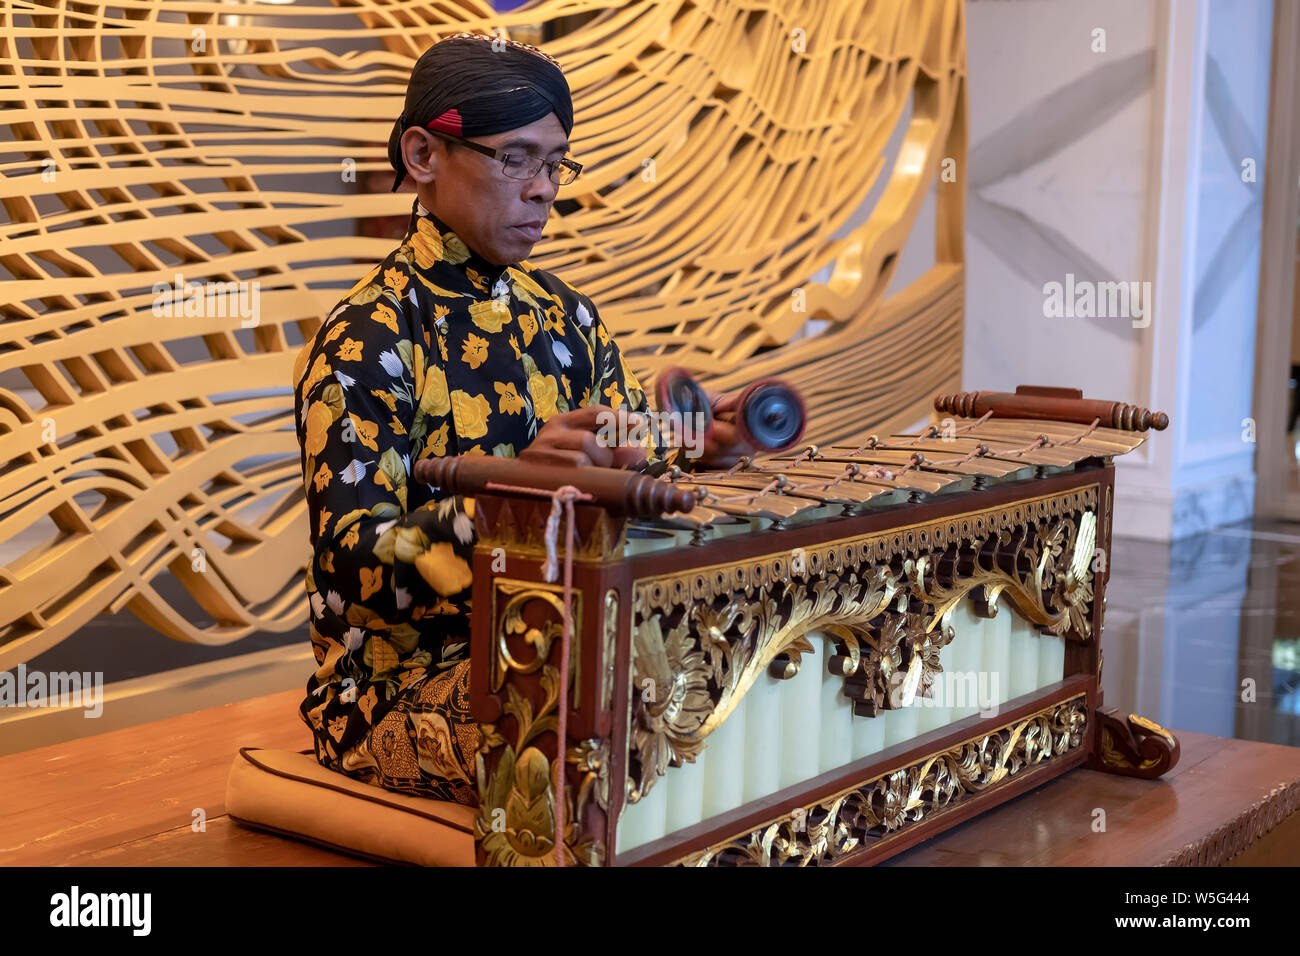 A Javanese man playing slenthem, a Javanese traditional music instrument part of gamelan orchestra. Stock Photo